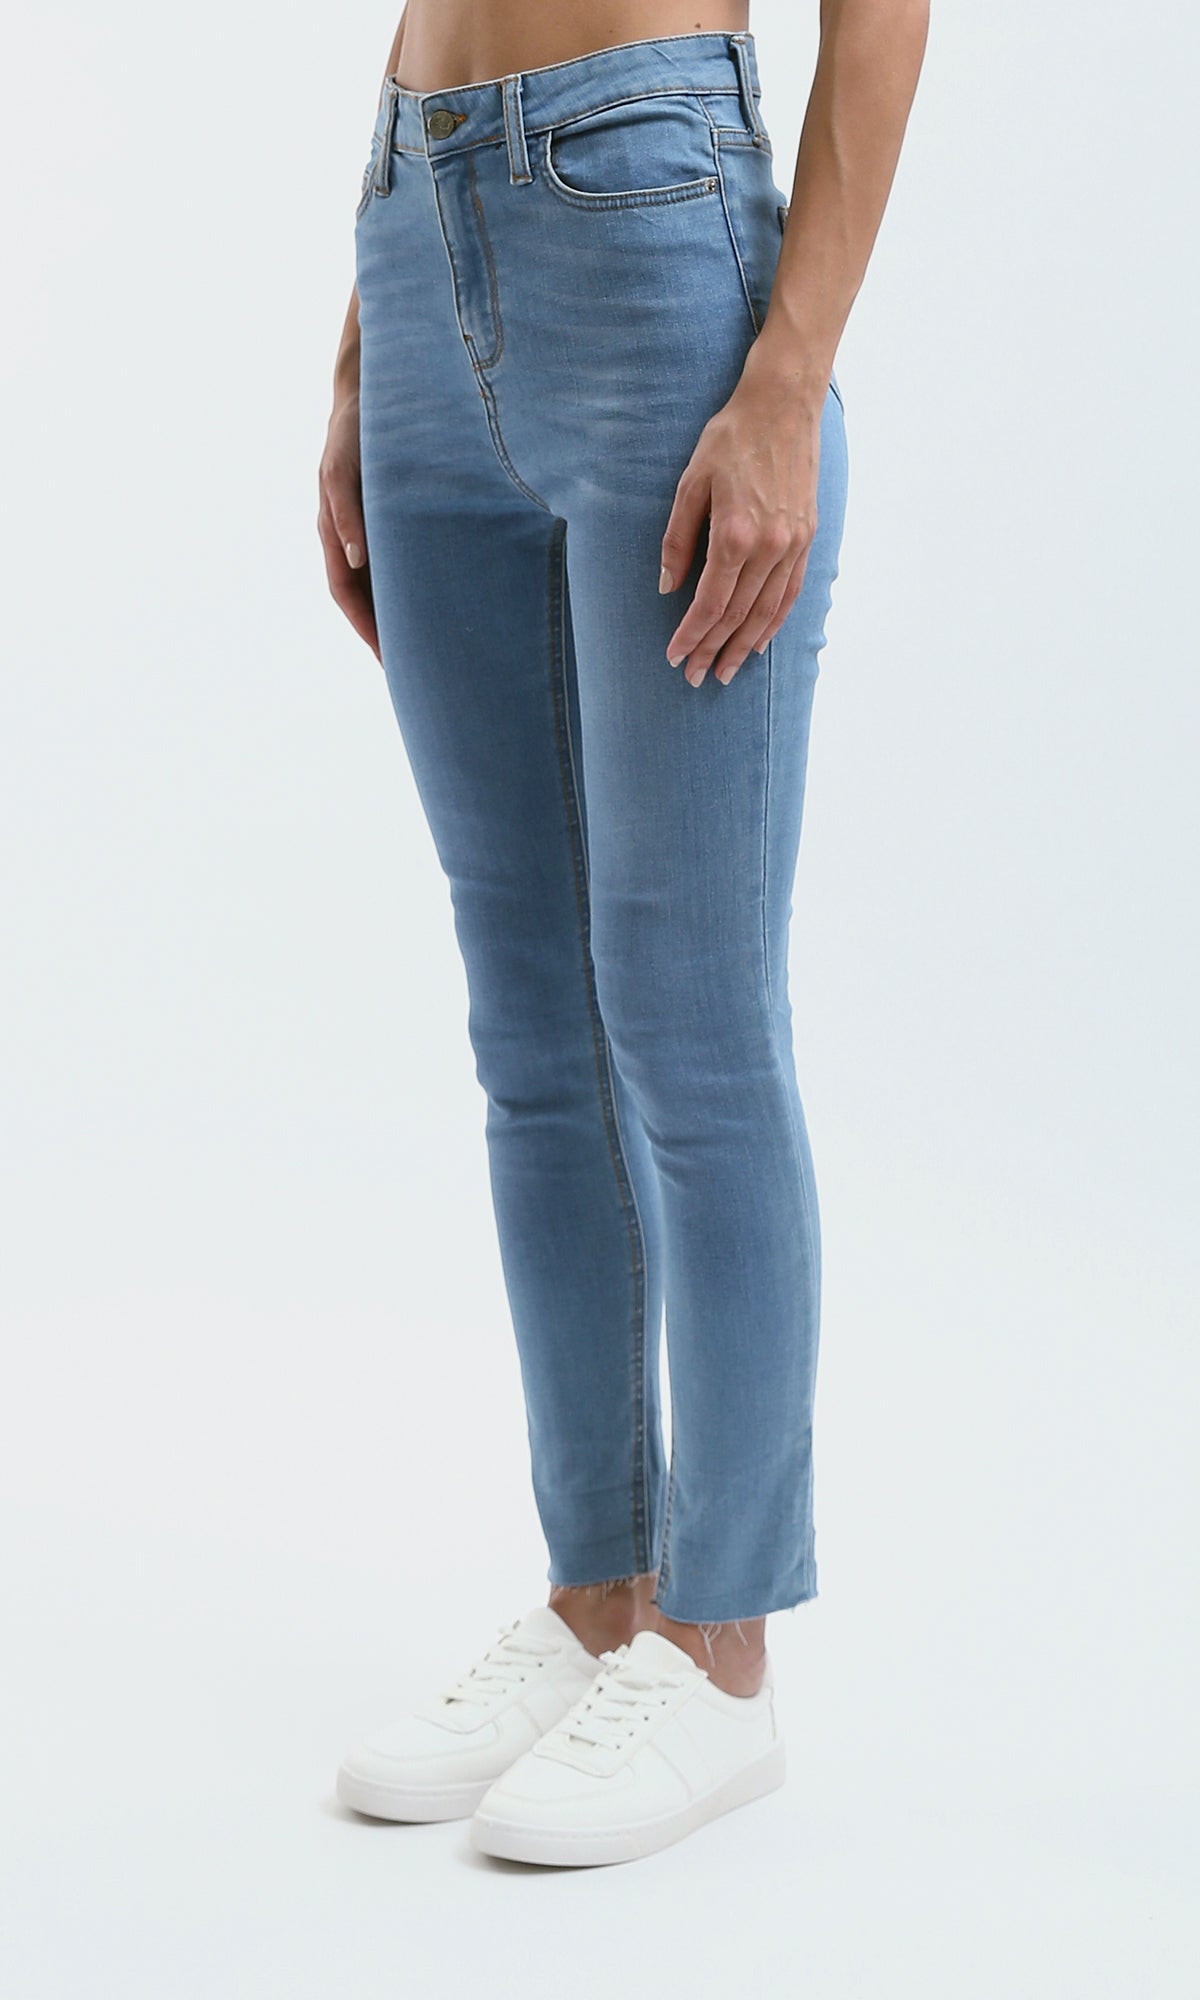 O183102 Solid Casual Skinny Jeans With Front Wash - Stonewash